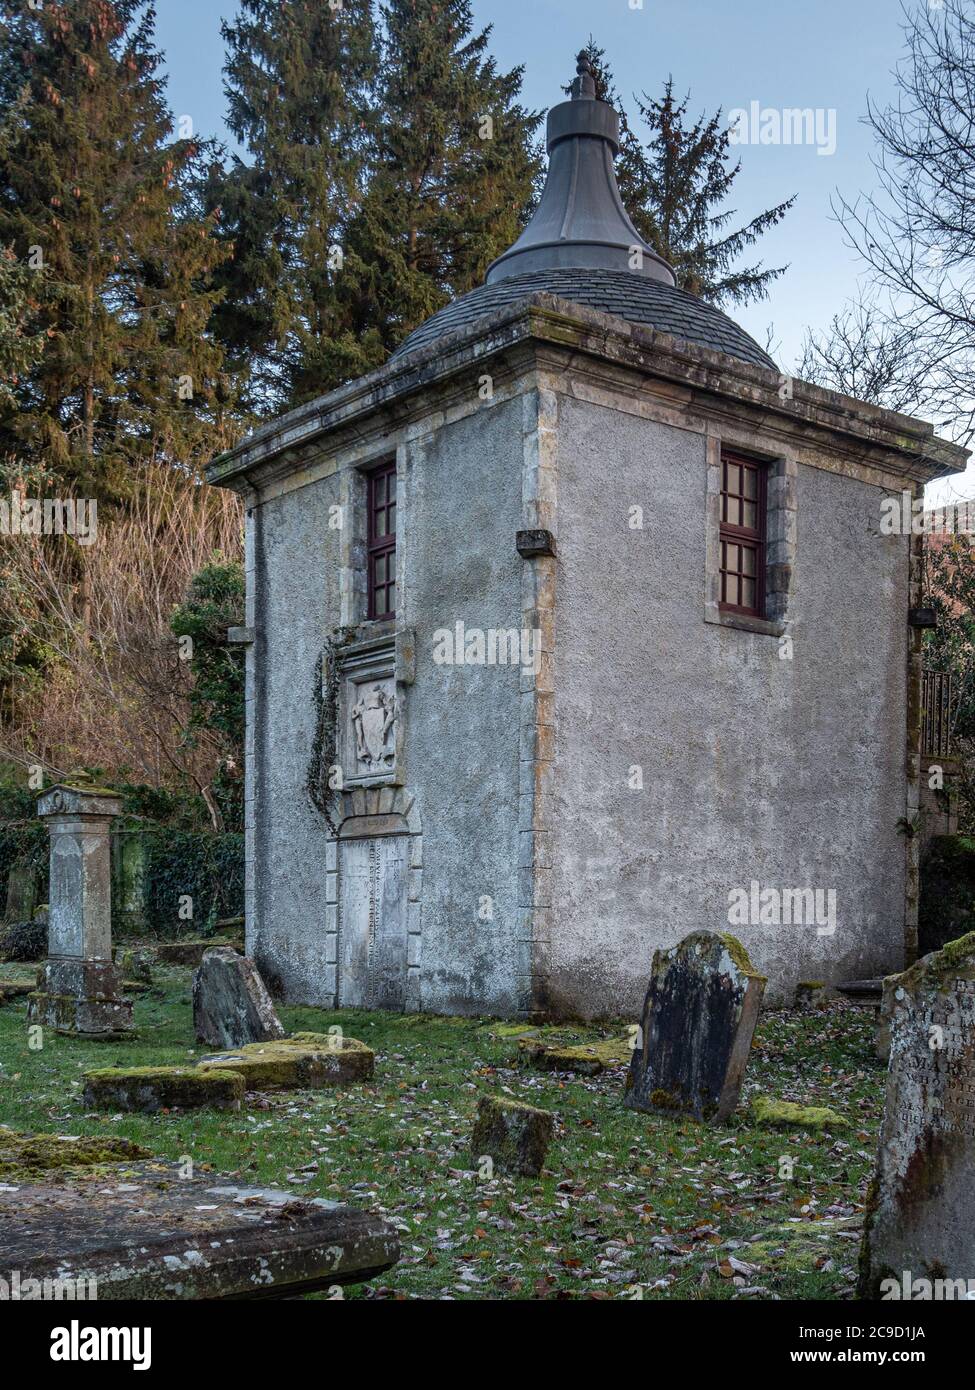 Lennox Mausoleum at Campsie Glen Built around 1714, the Lennox Family vault is situated in St Machan's graveyard at Clachan of Campsie where some of t Stock Photo